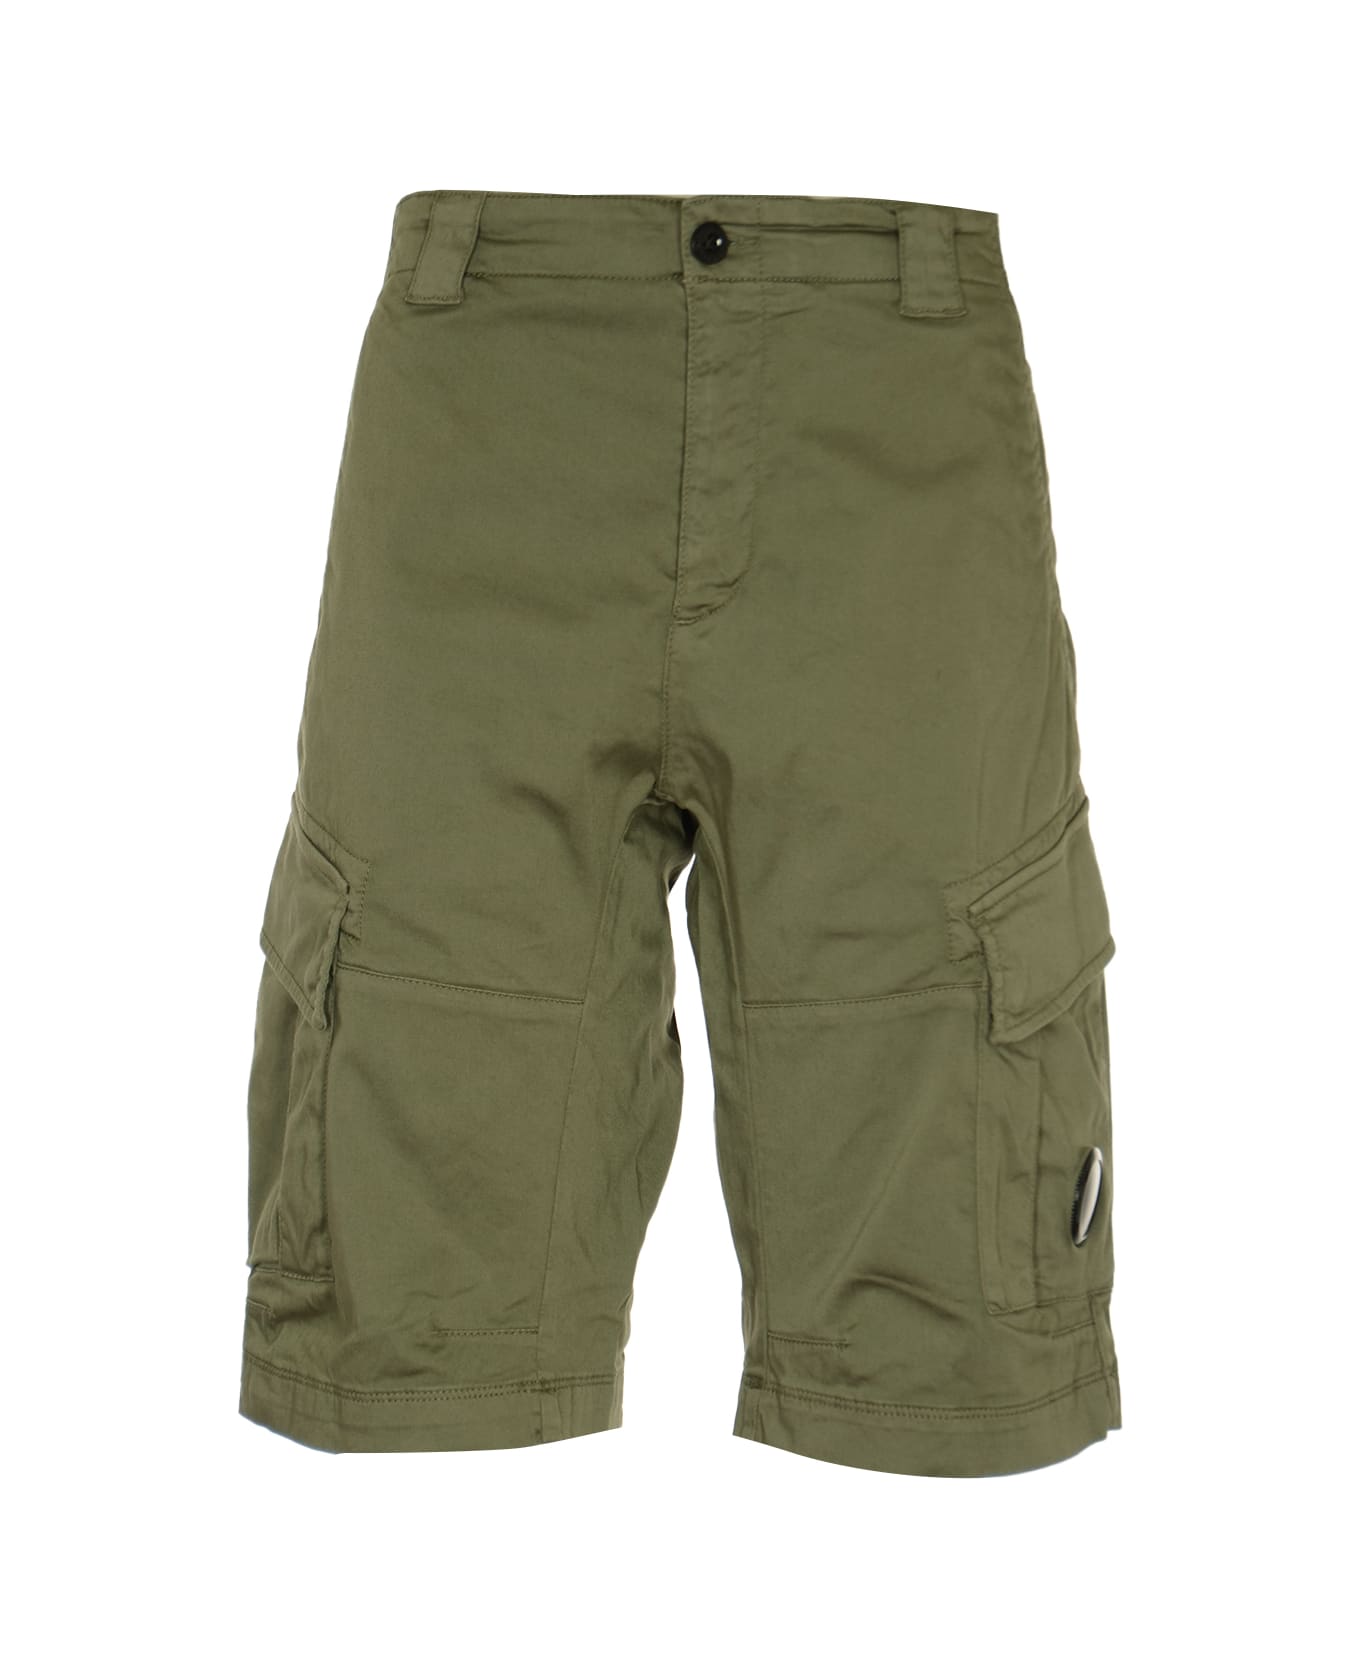 C.P. Company Lens-detailed Cargo Shorts - Agave Green